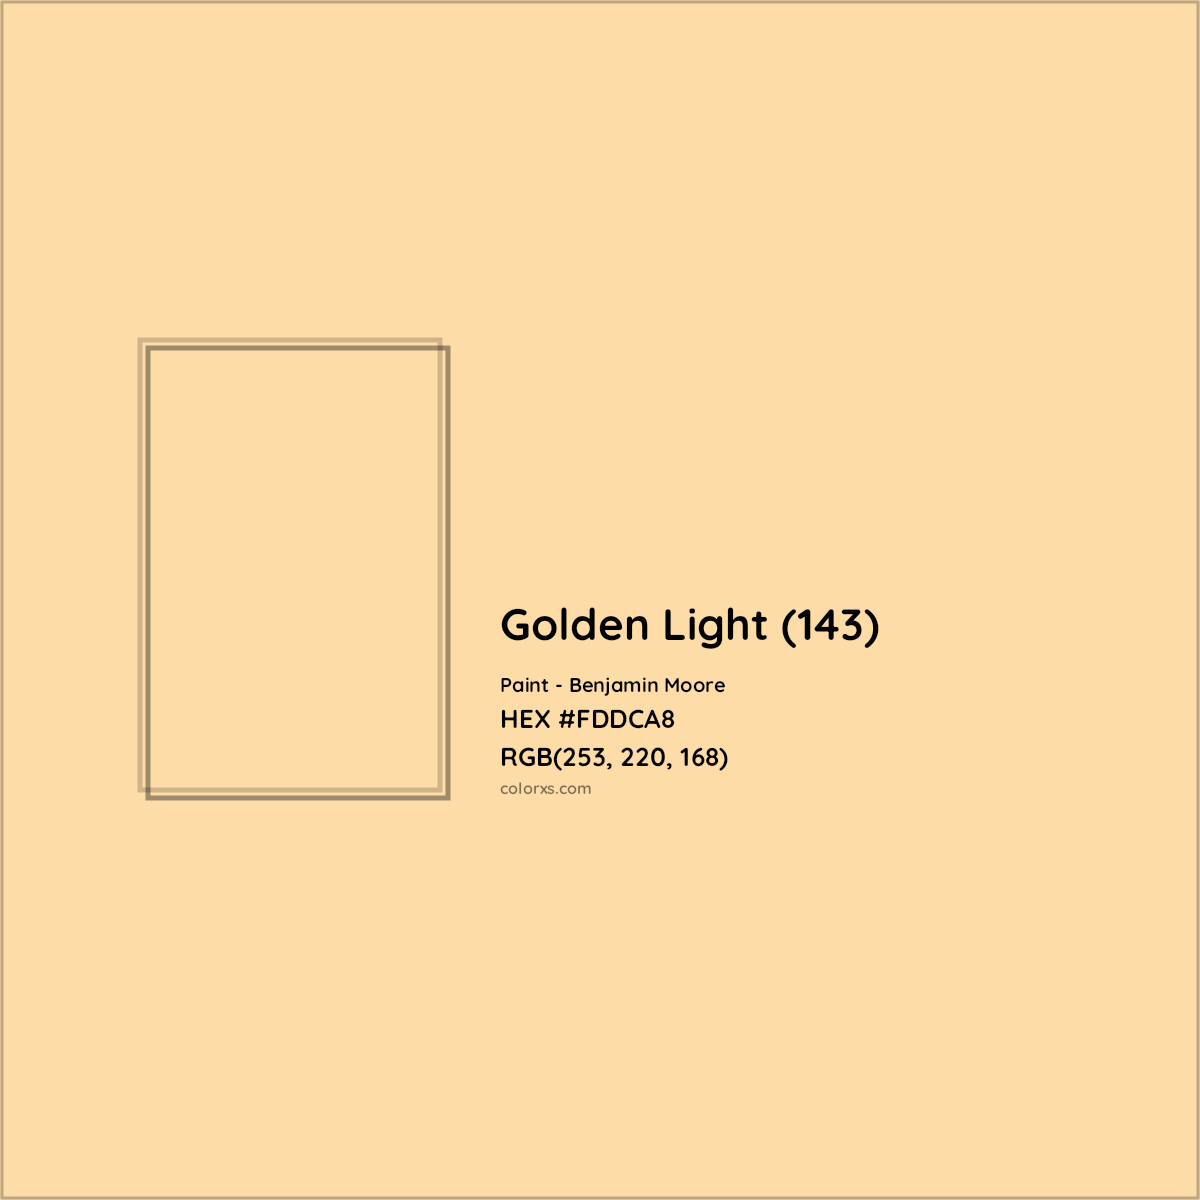 Benjamin Moore Golden Light (143) Paint color codes, similar and - colorxs.com